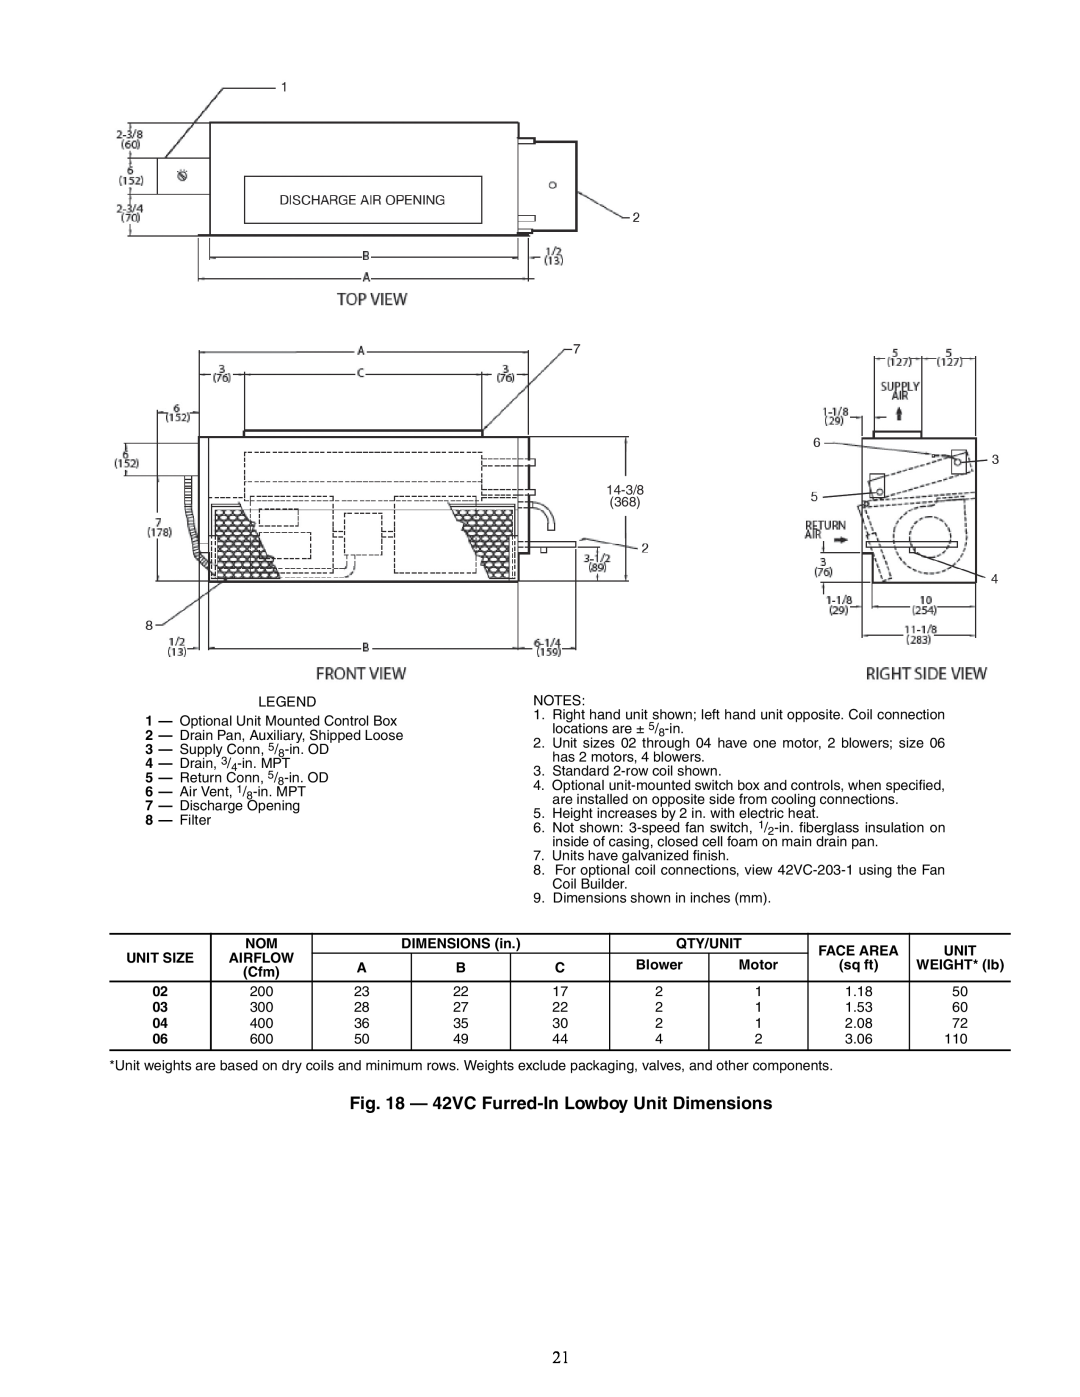 Carrier 42S, 42C, 42D specifications 42VC Furred-InLowboy Unit Dimensions 